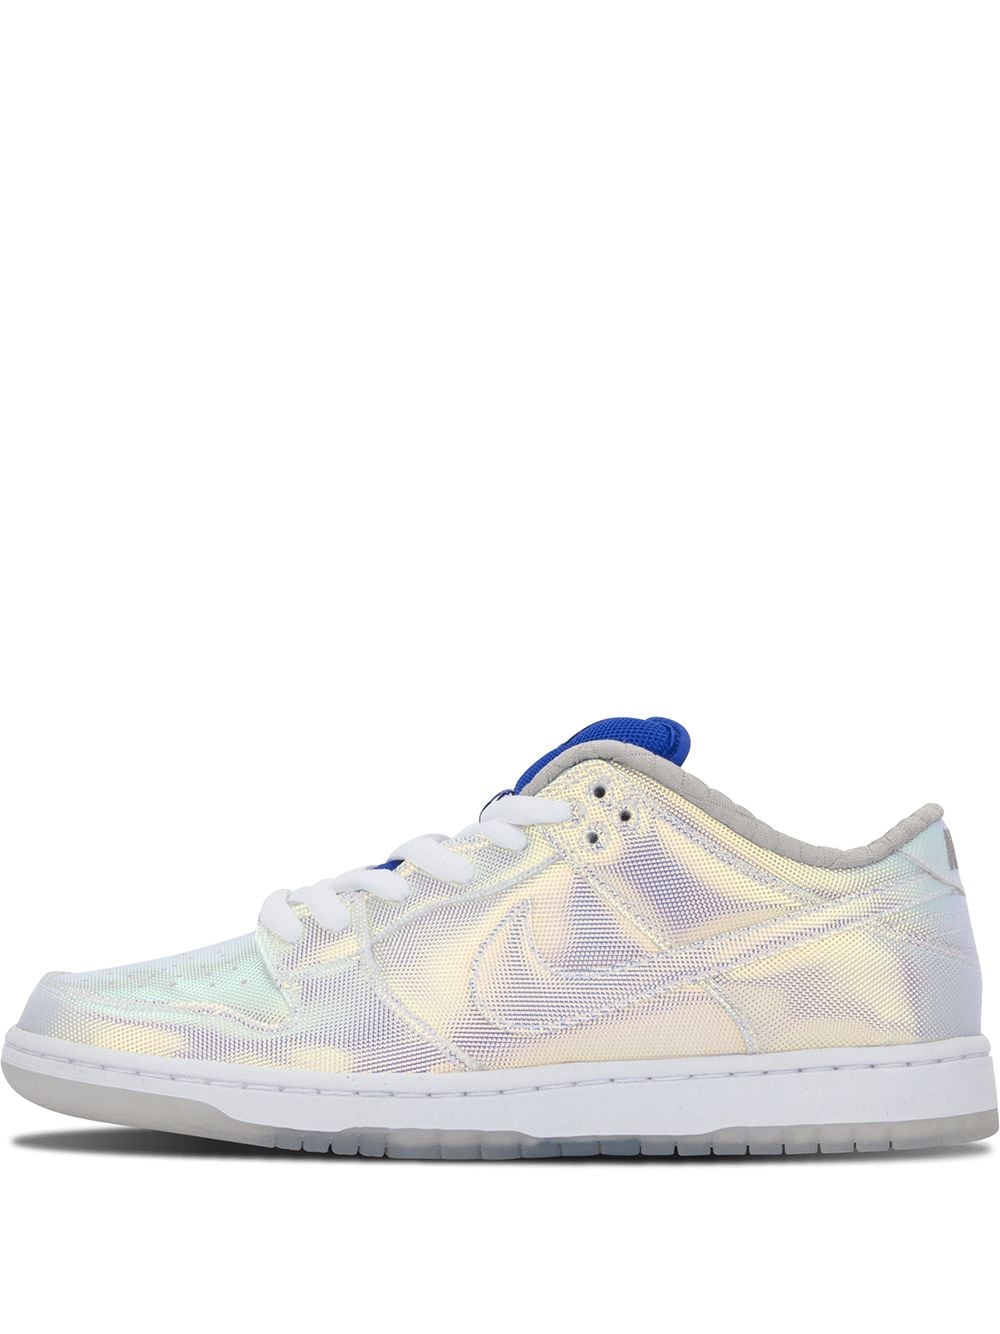 NIKE X CONCEPTS SB DUNK LOW PRO "HOLY GRAIL" SNEAKERS